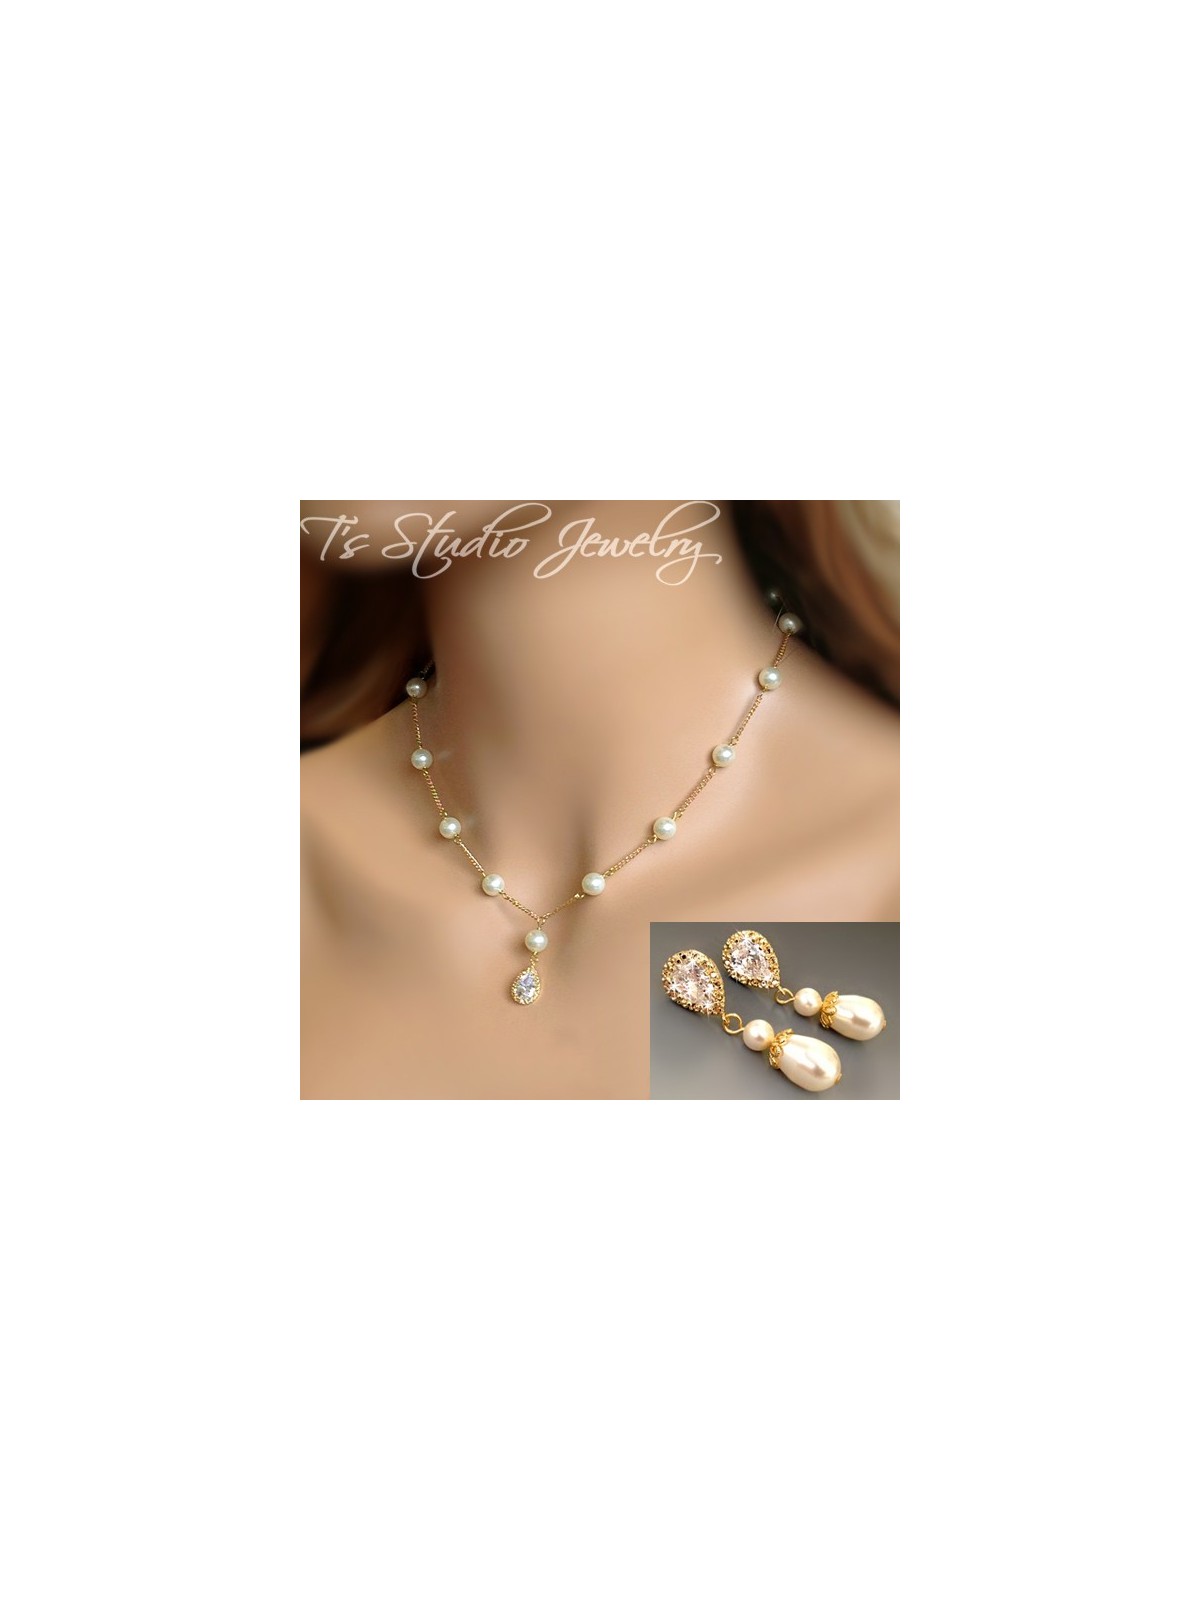 Pearl Backdrop Lariat Bridal Necklace Back Drop Silver or Gold Chain